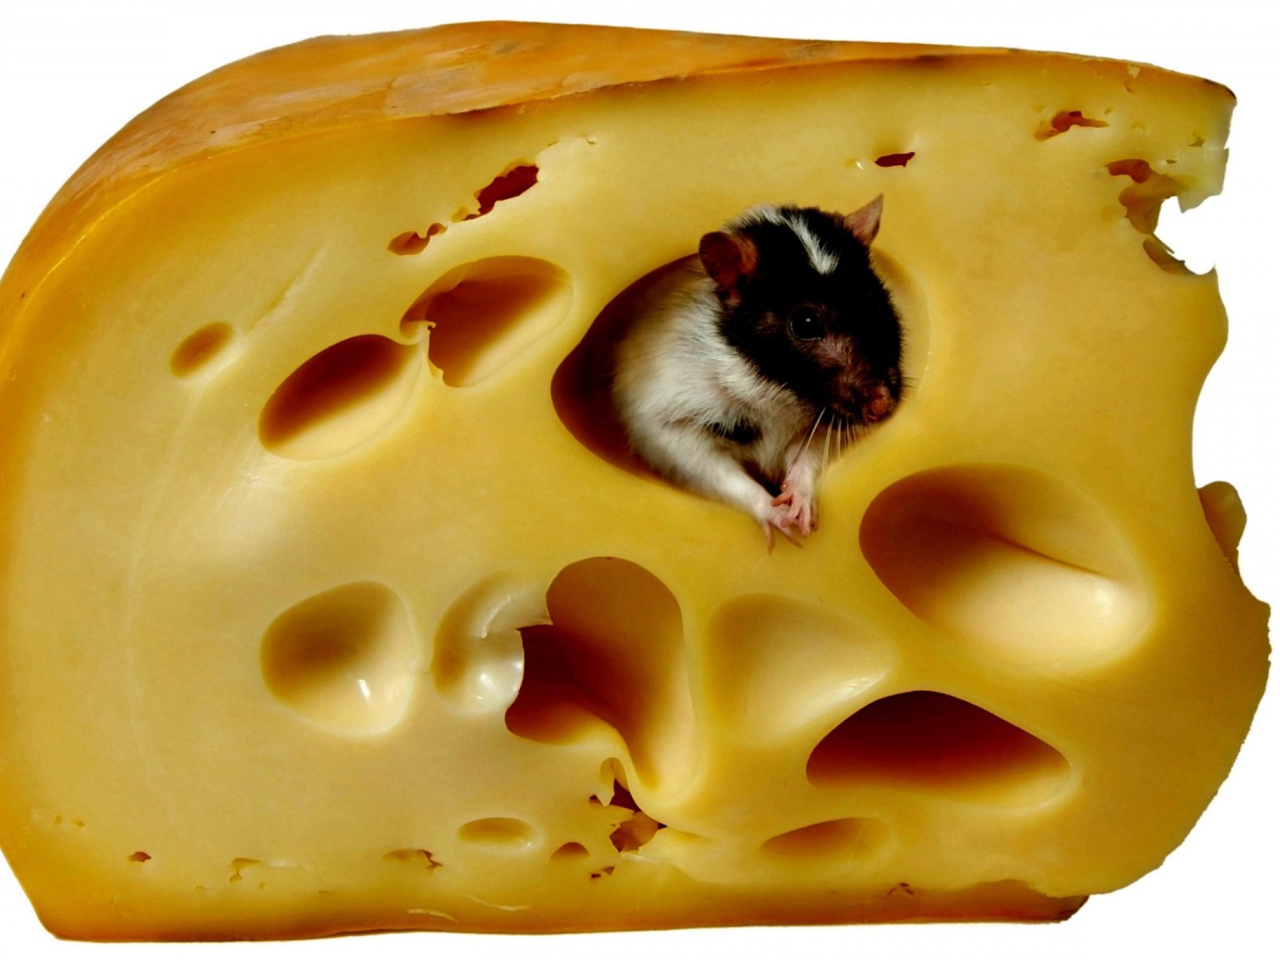 Mouse And Cheese wallpaper 1280x960